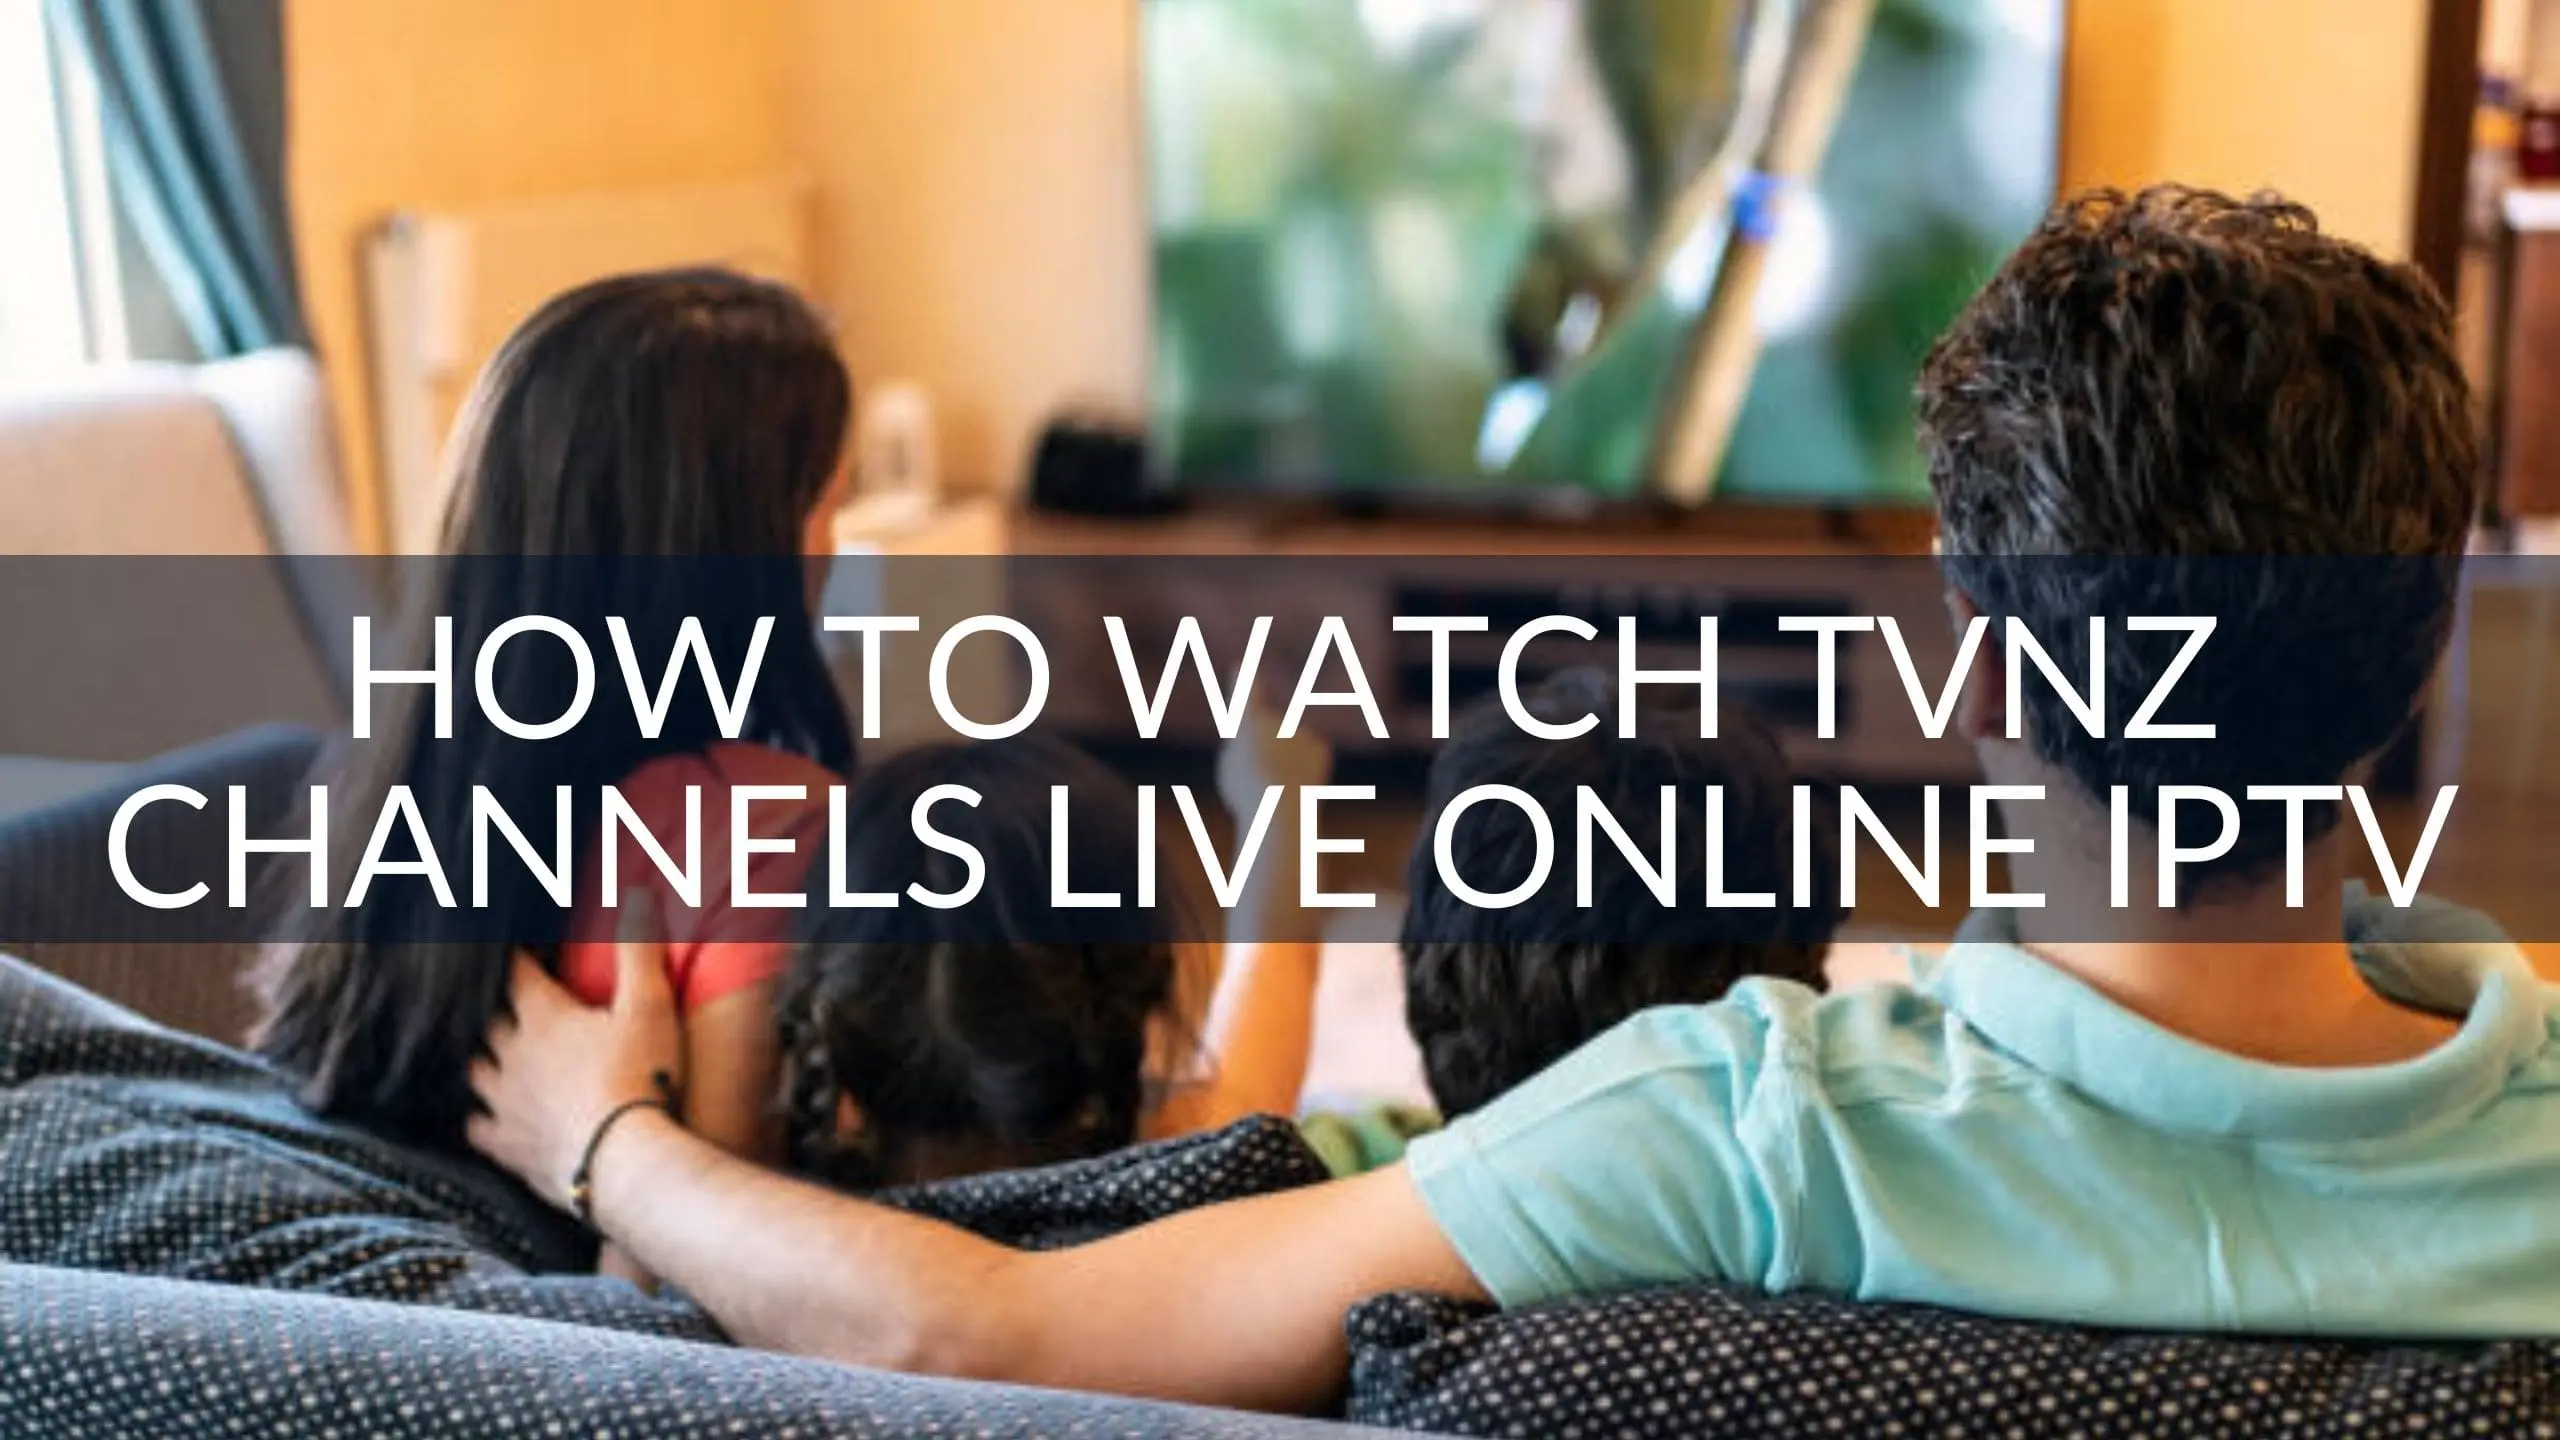 How to Watch TVNZ Channels Live Online With IPTV